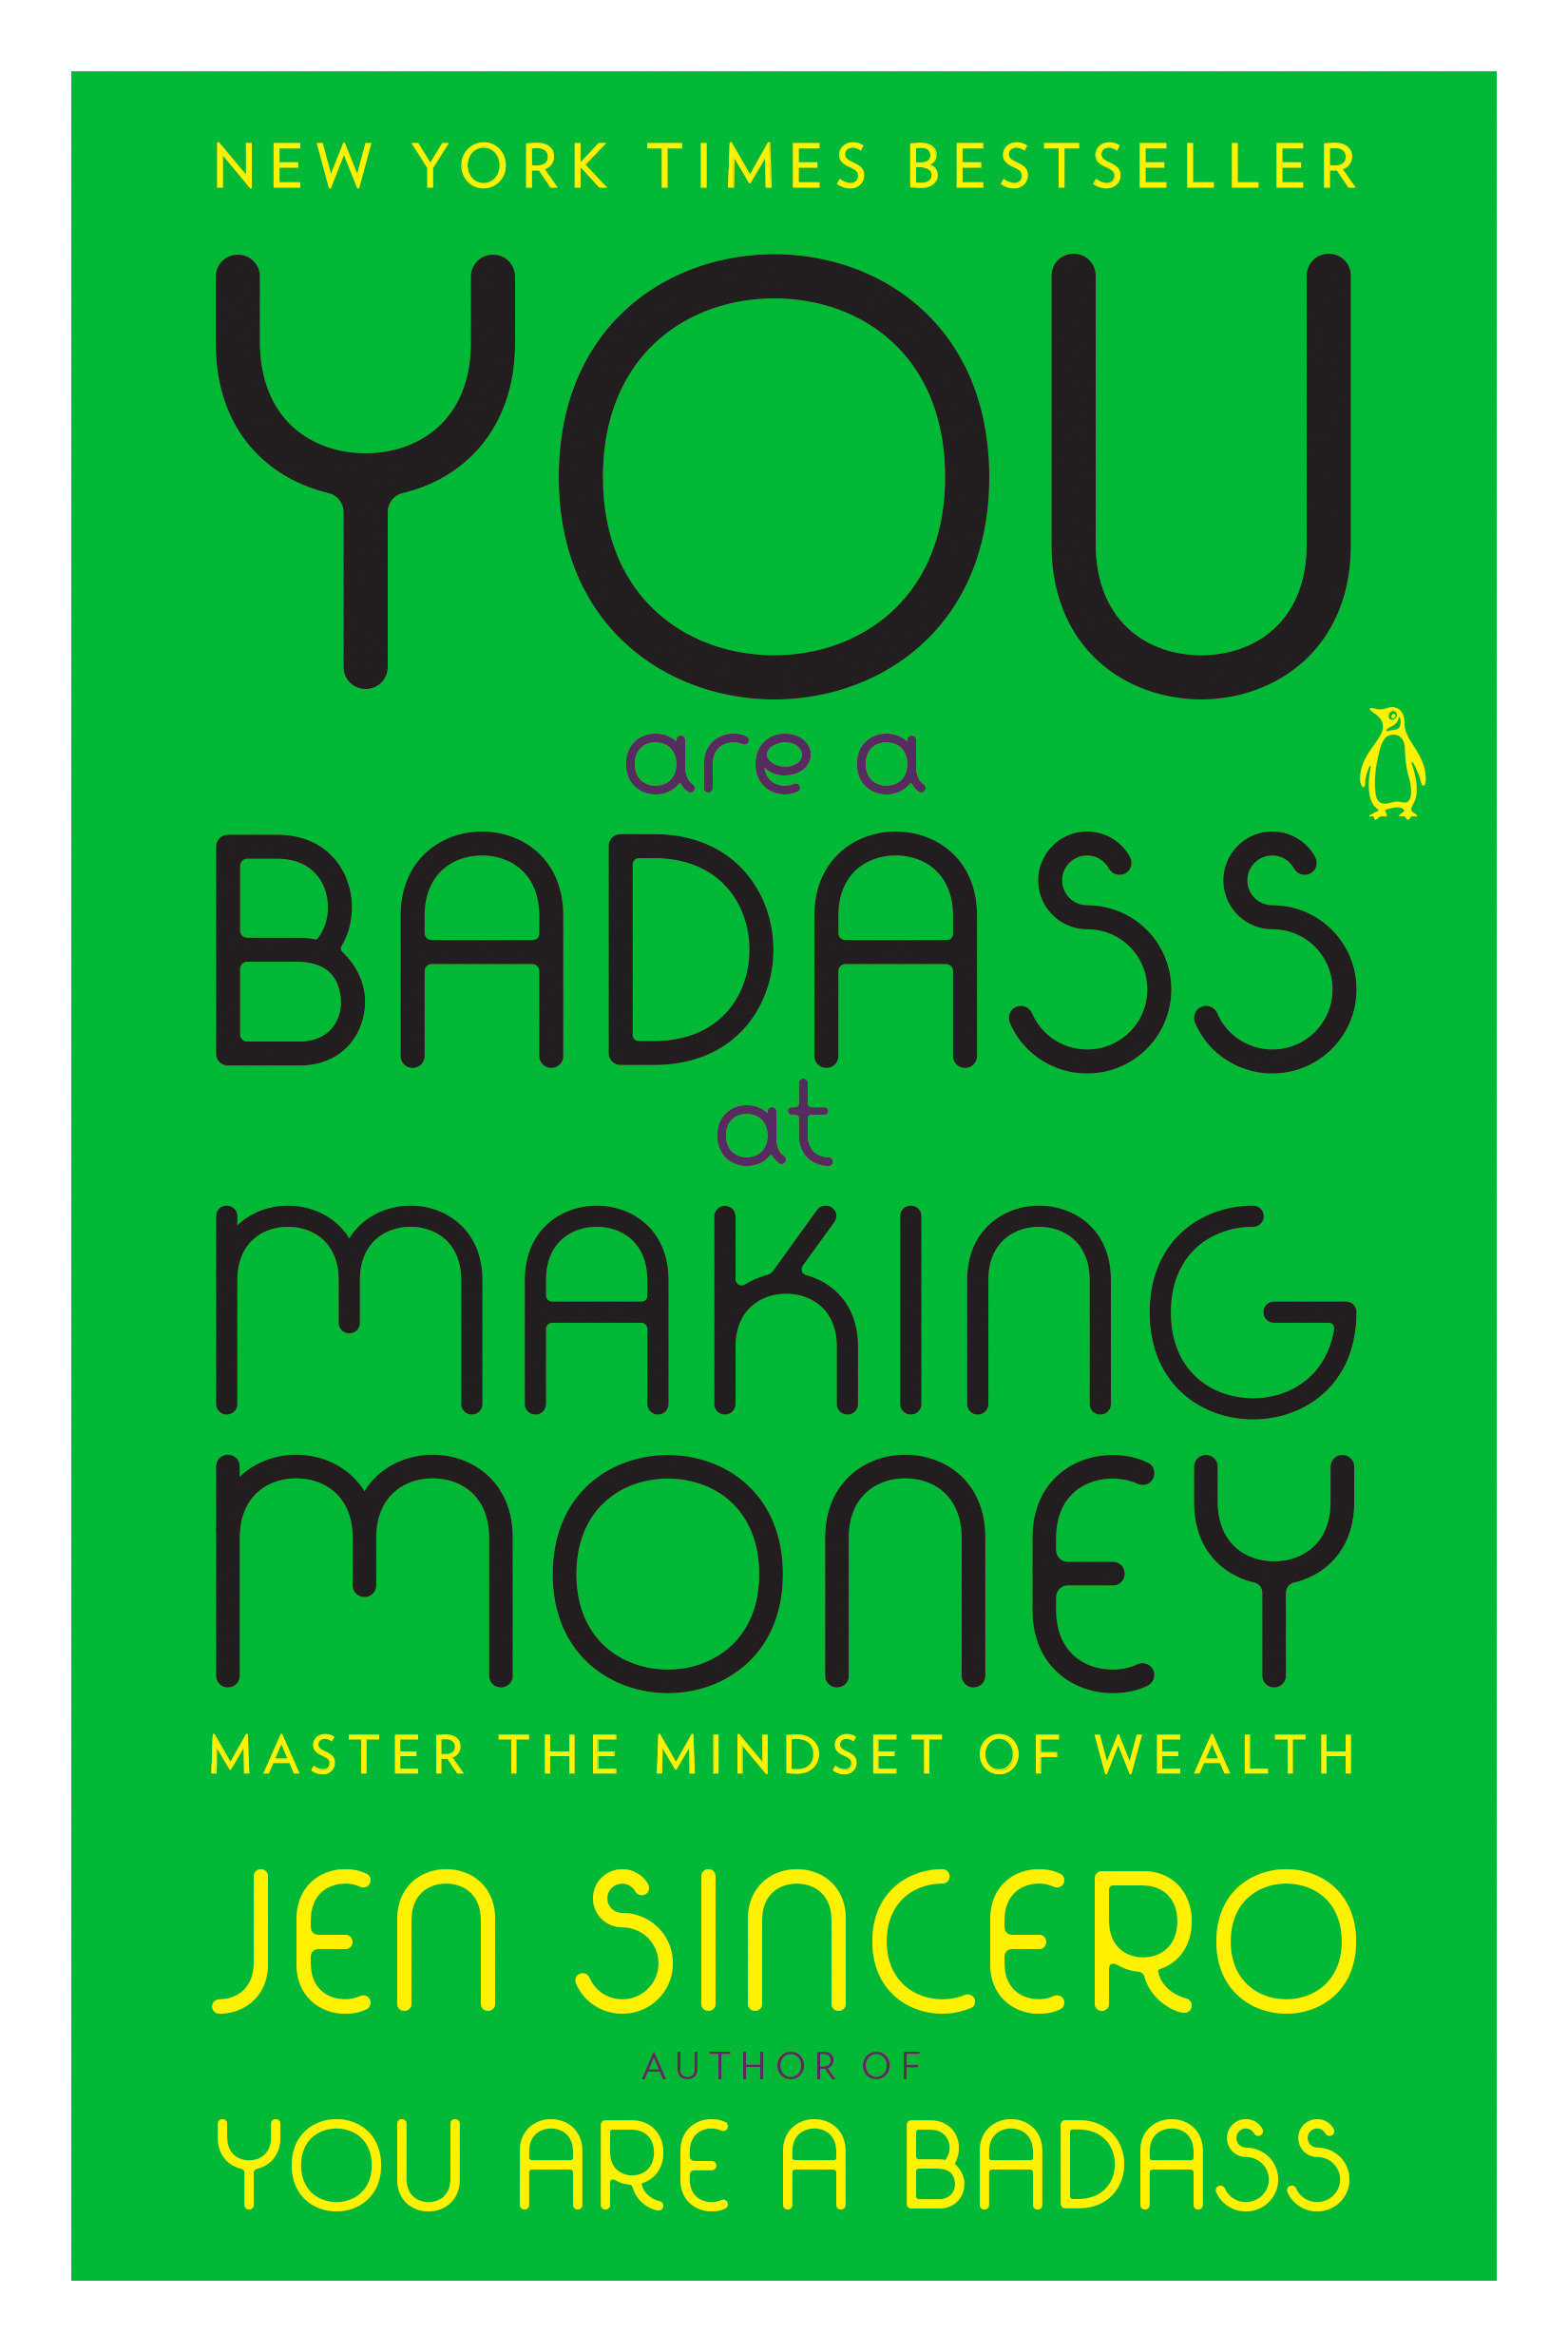 You are a badass at making money master the mindset of wealth cover image